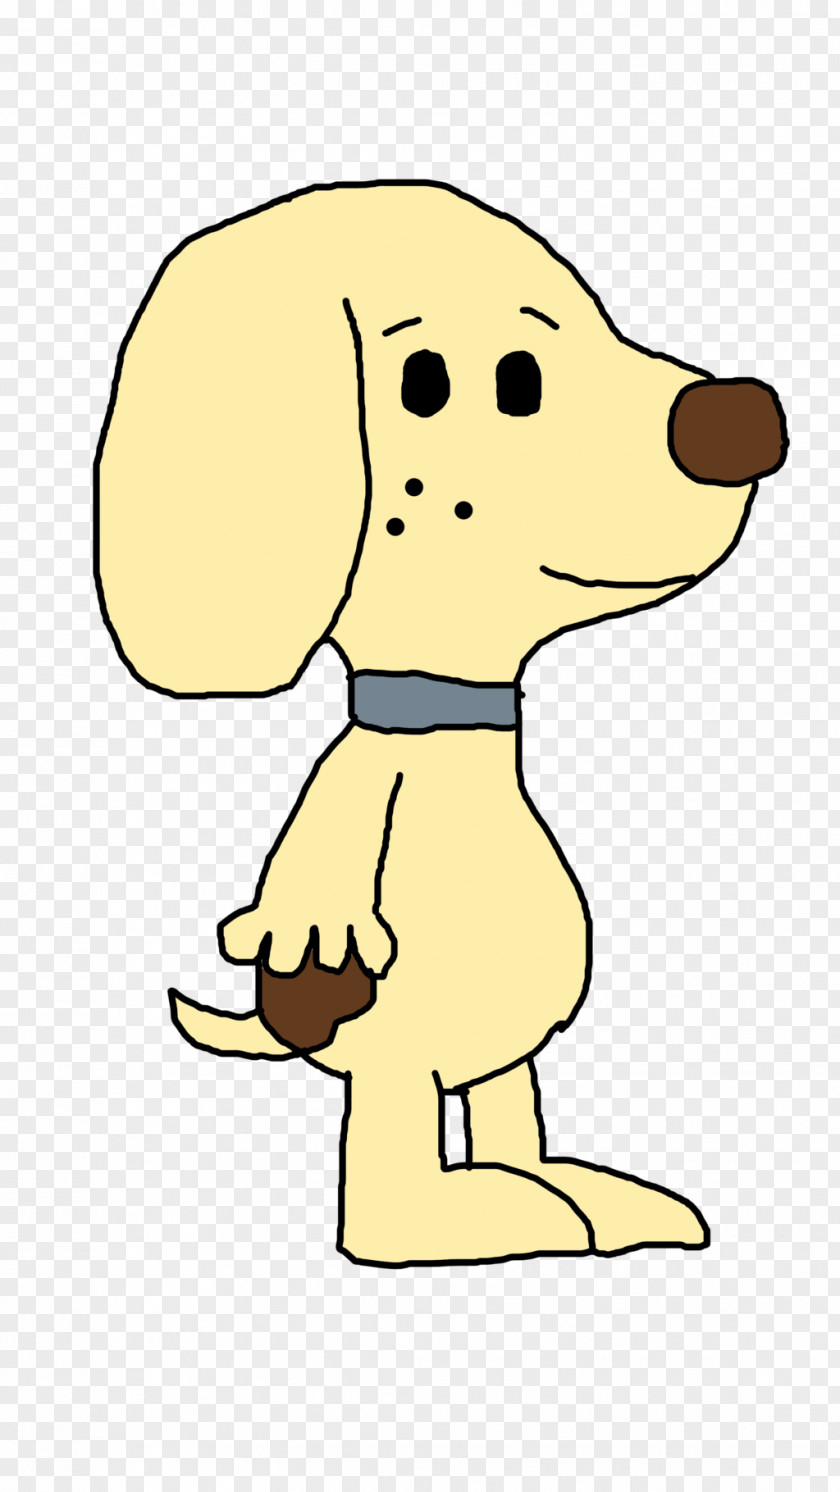 Peanuts Snoopy Dog MetLife Puppy PNG